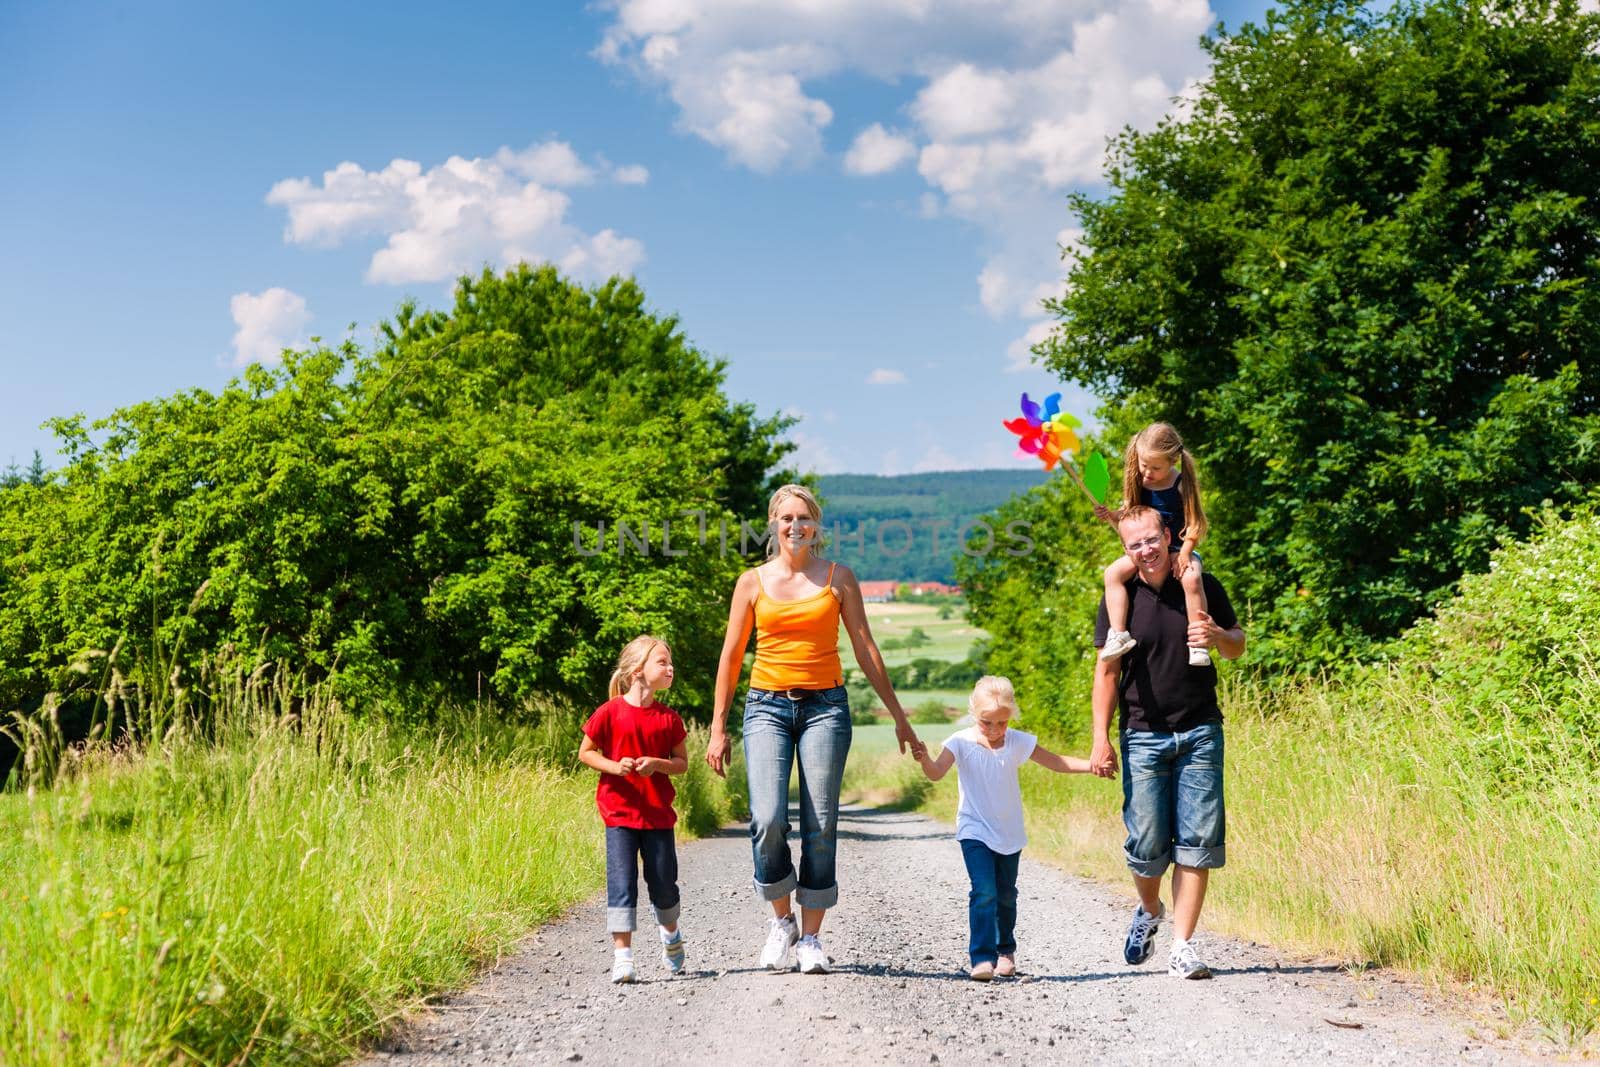 Family walking down a rural path on bright summer day